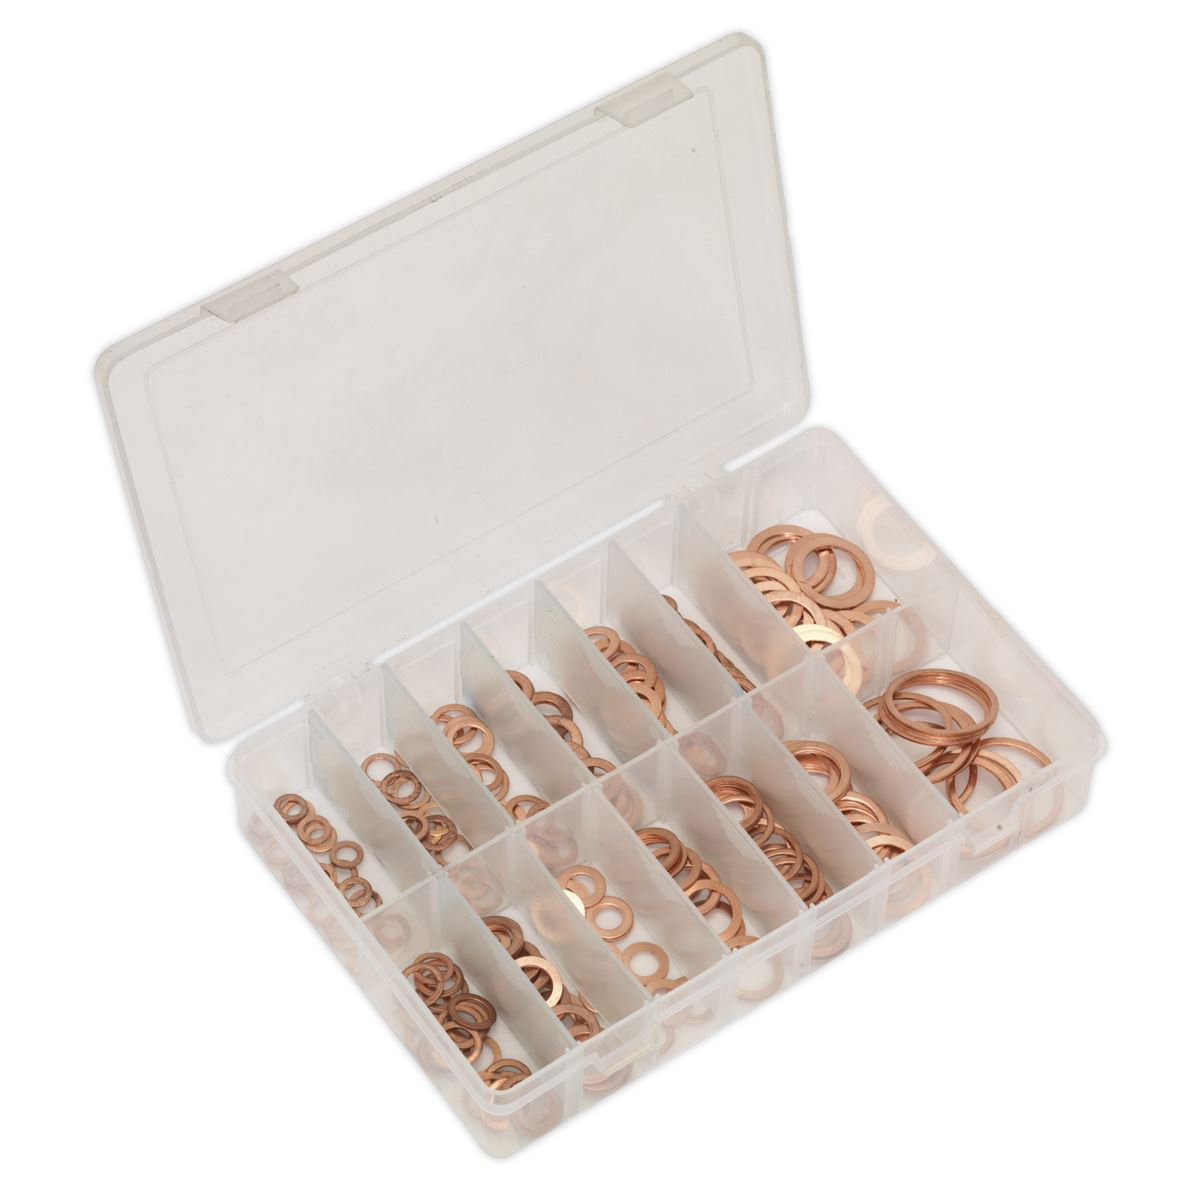 Sealey Copper Sealing Washer Assortment 250pc - Metric